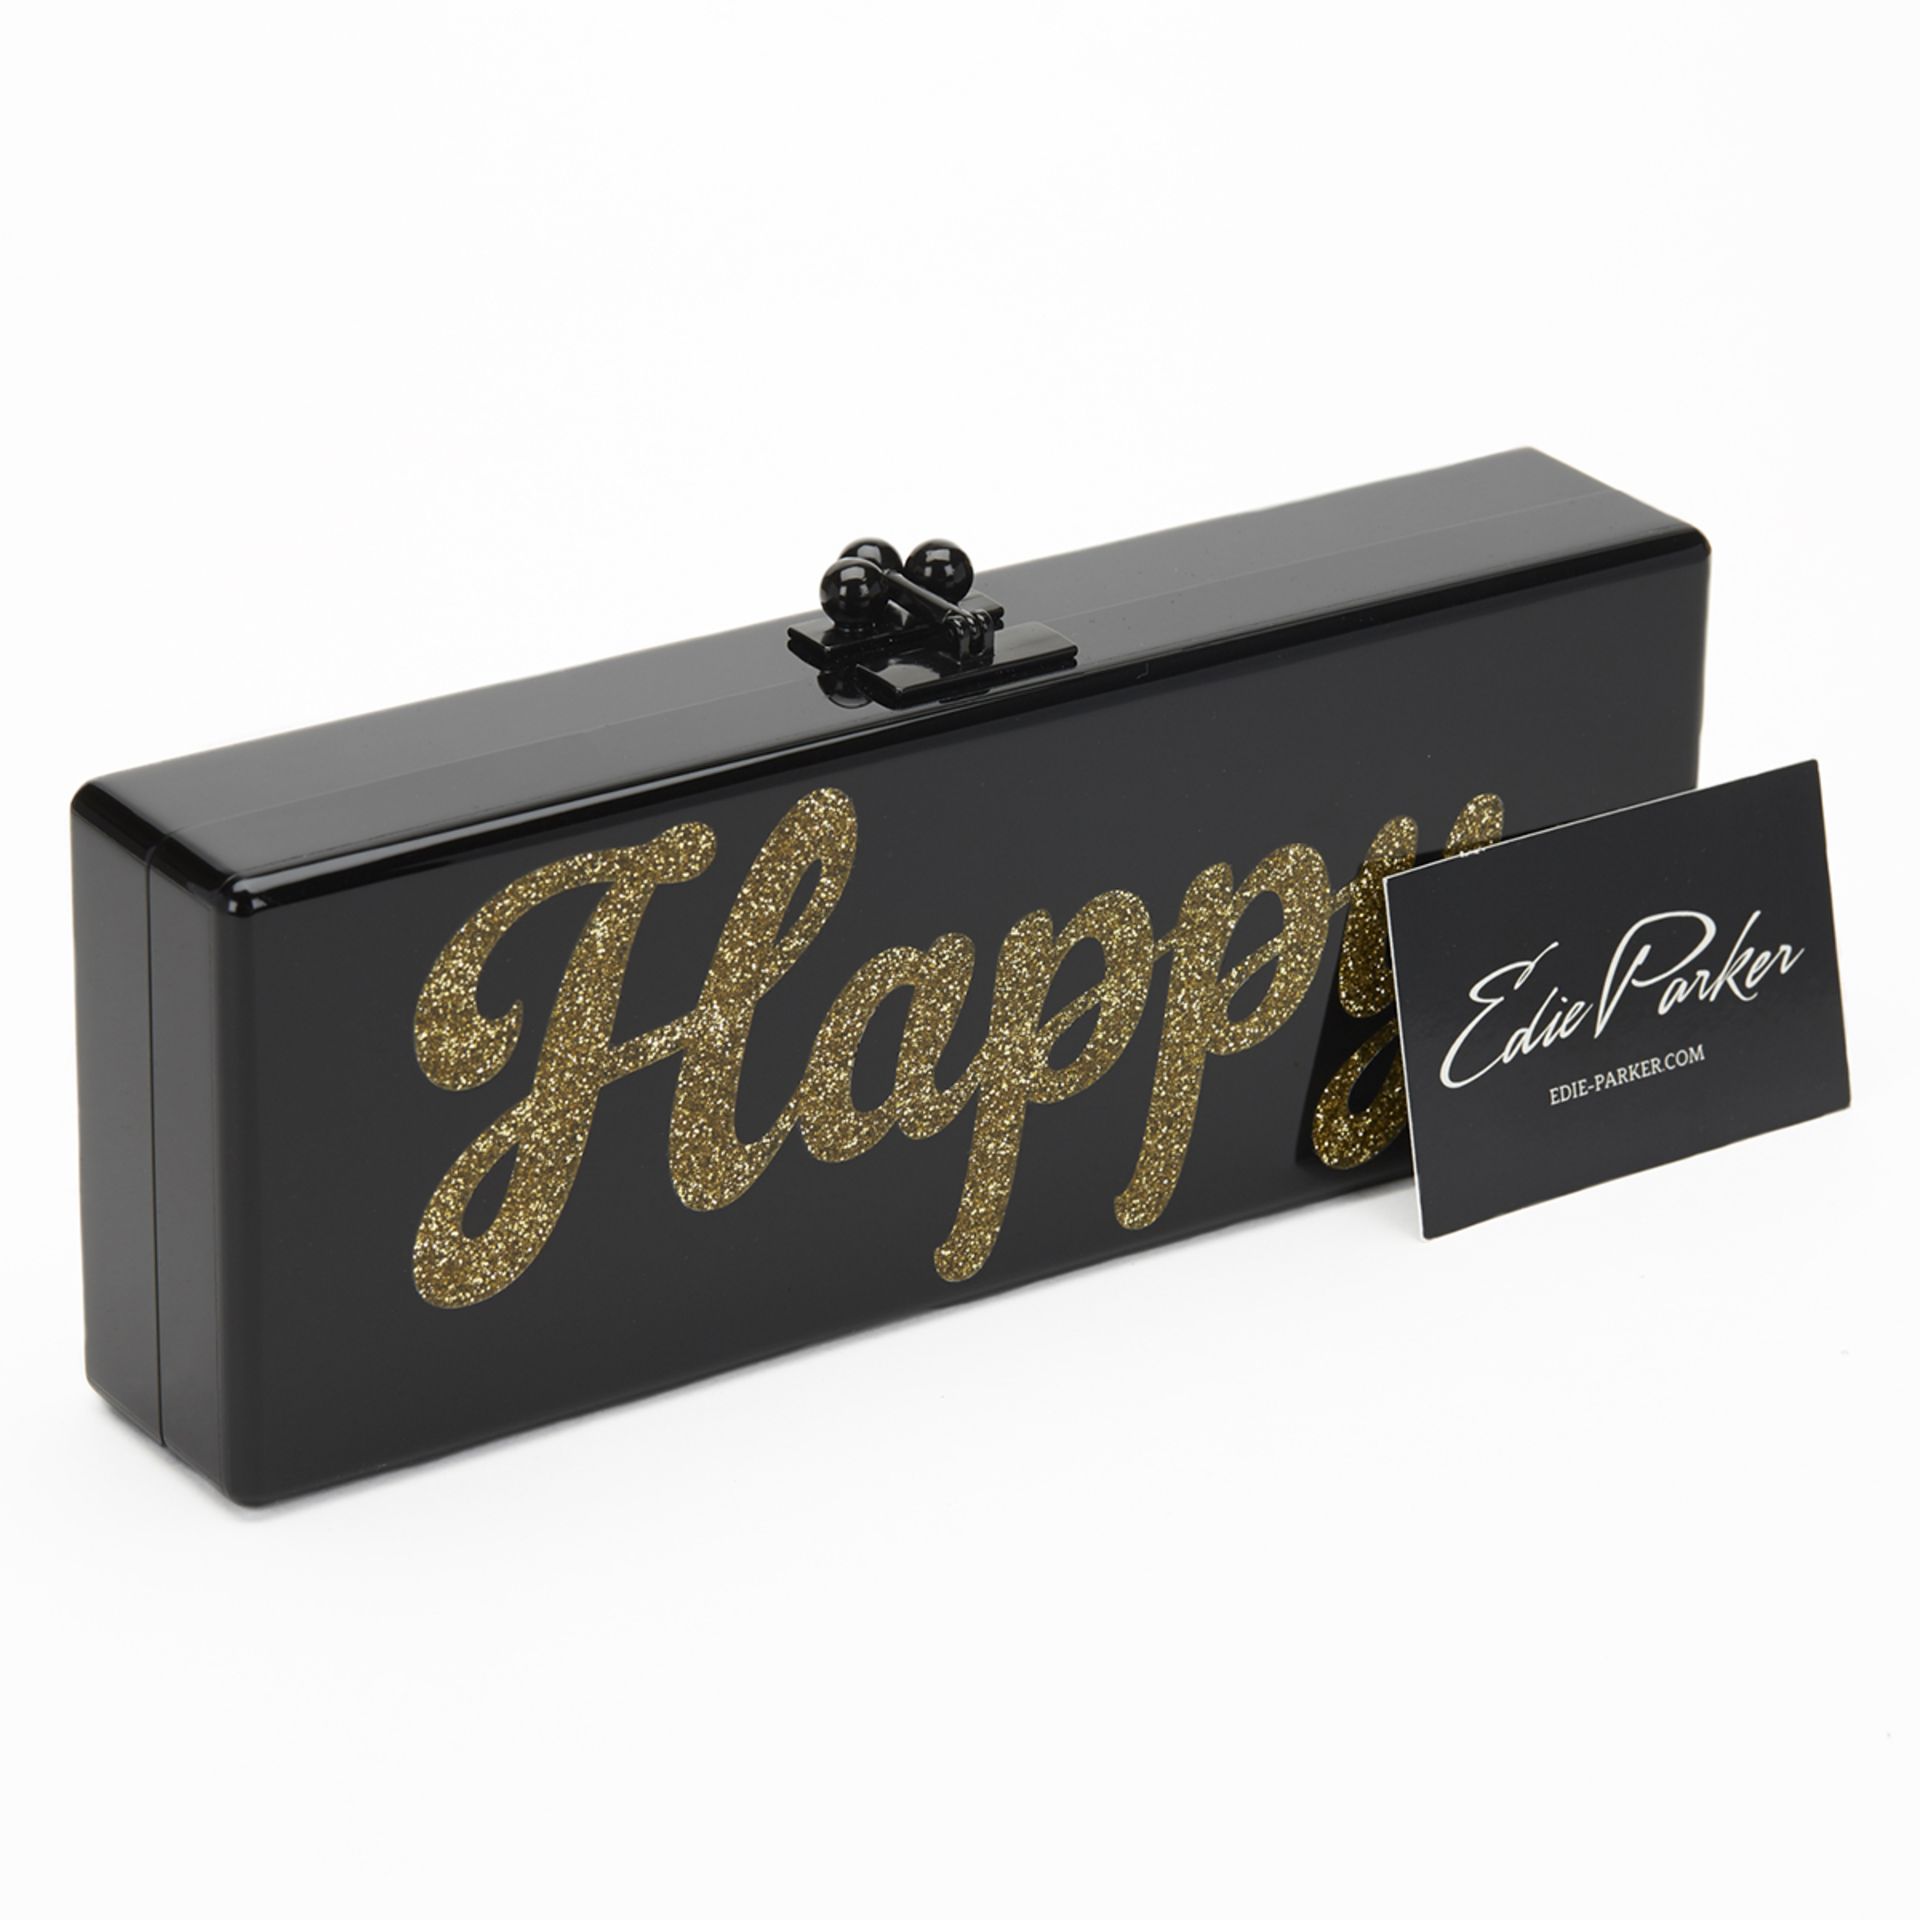 Edie Parker Black Glittered Acrylic Happy Box Clutch - Image 9 of 9